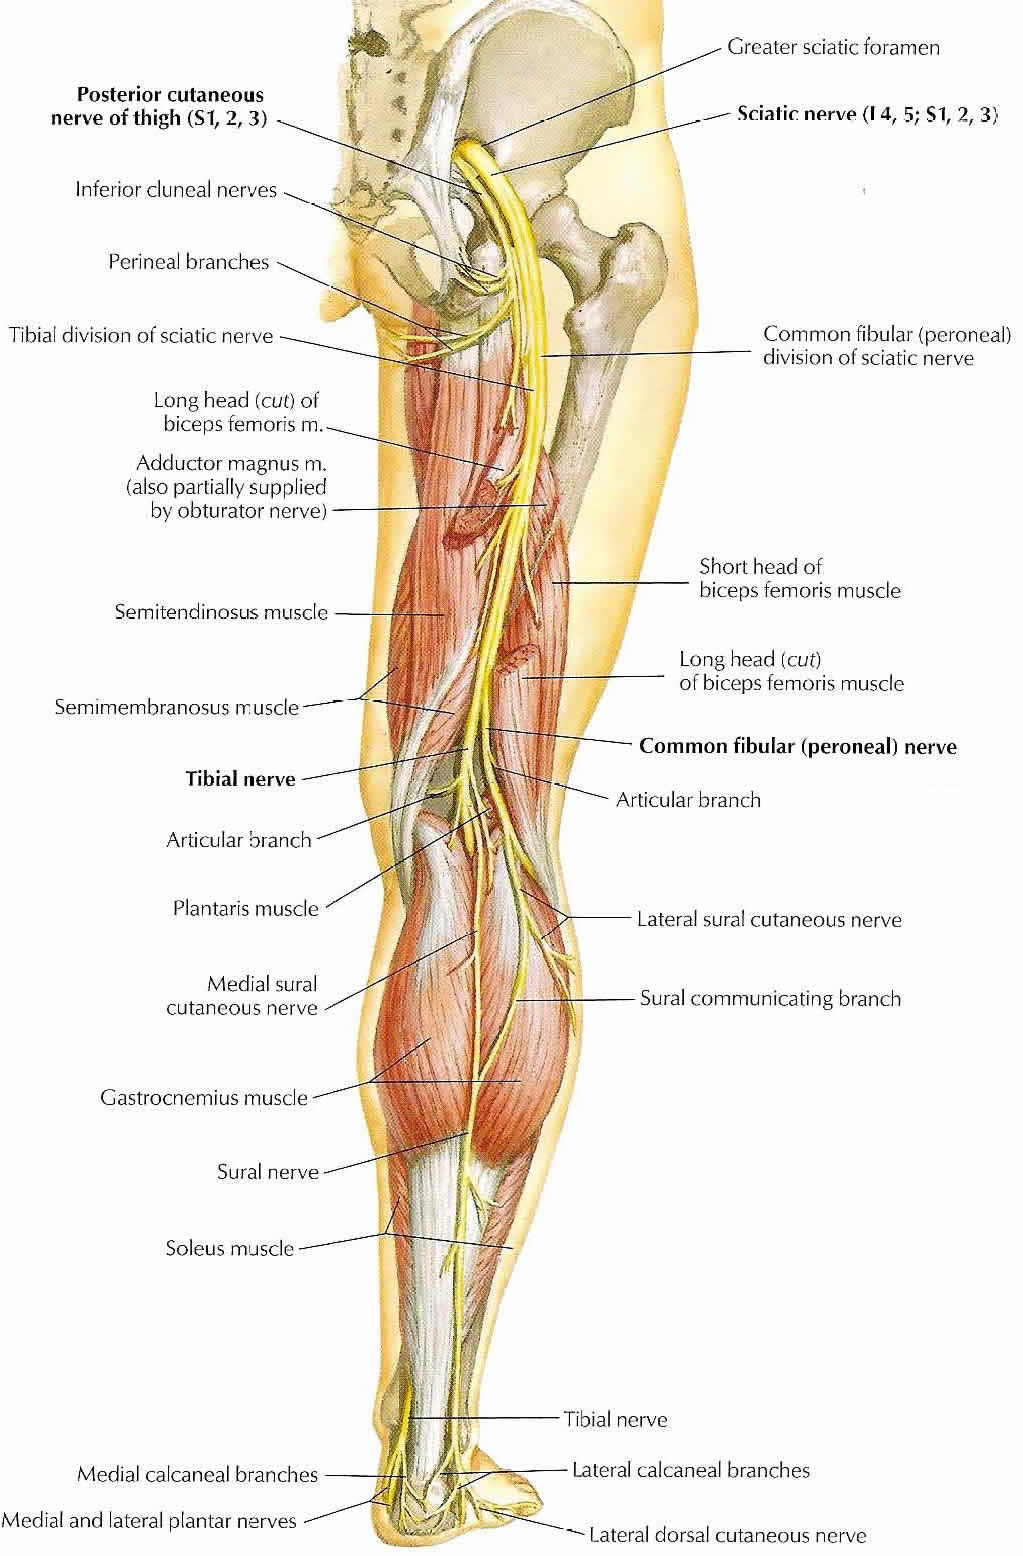 The Sciatic Nerve: A River of Energy Suppyling Human Legs